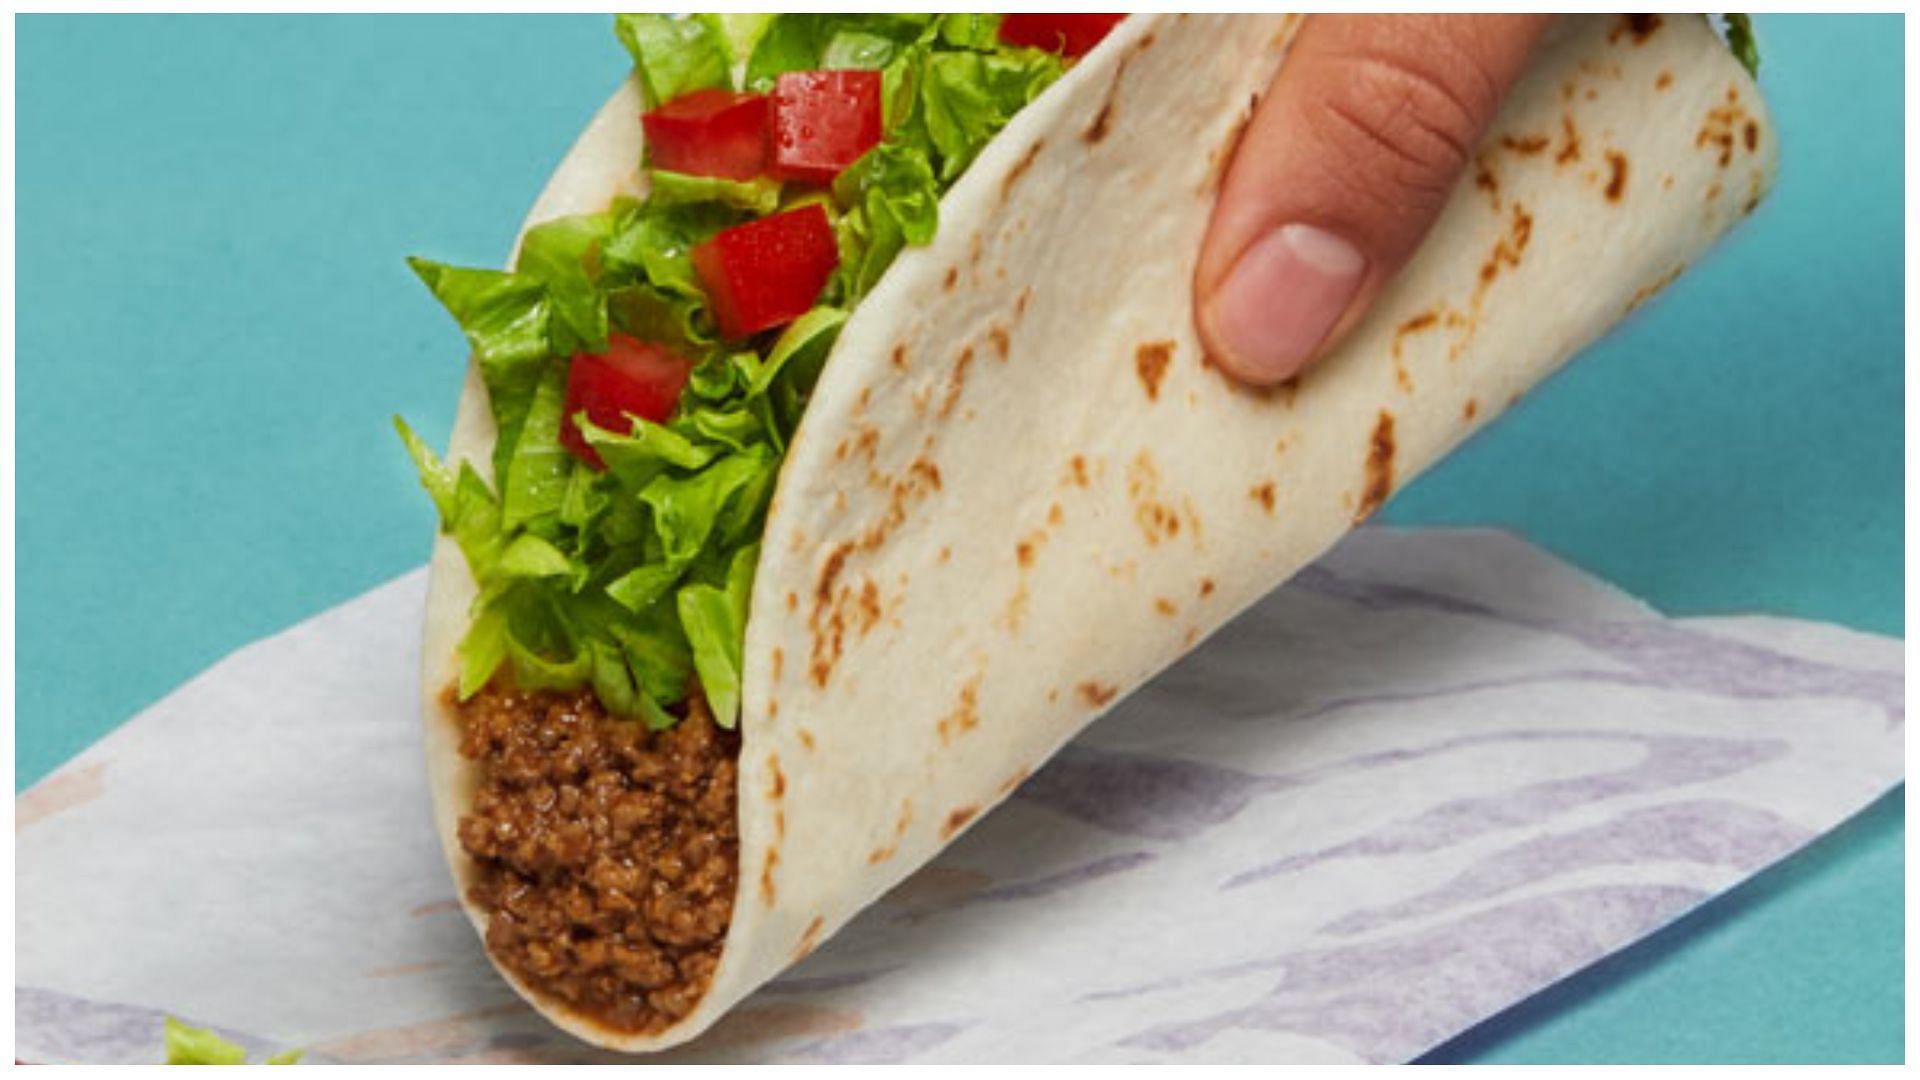 Fresco Style Soft Taco with Beef (image via Taco Bell)